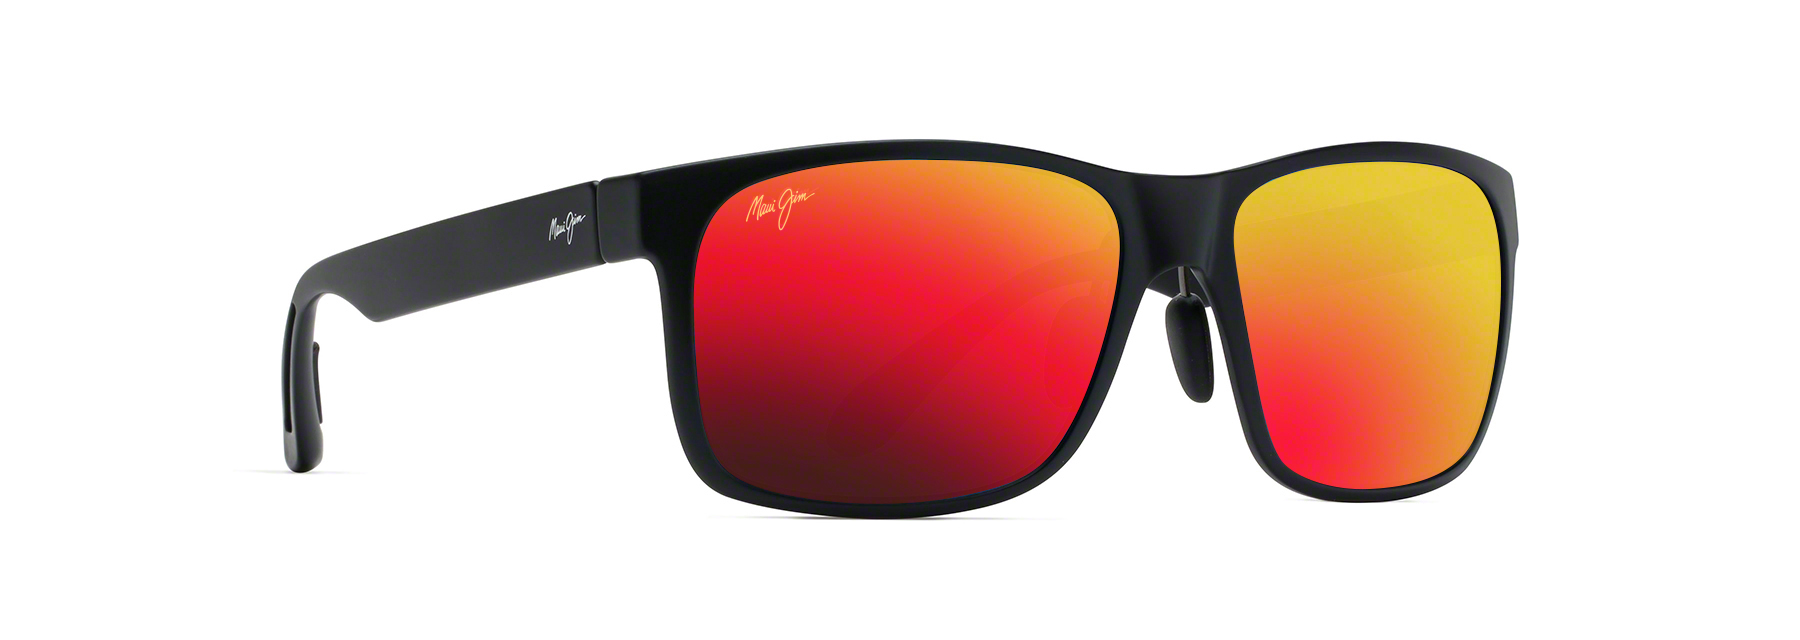 105_MAUIJIMPIC1.png